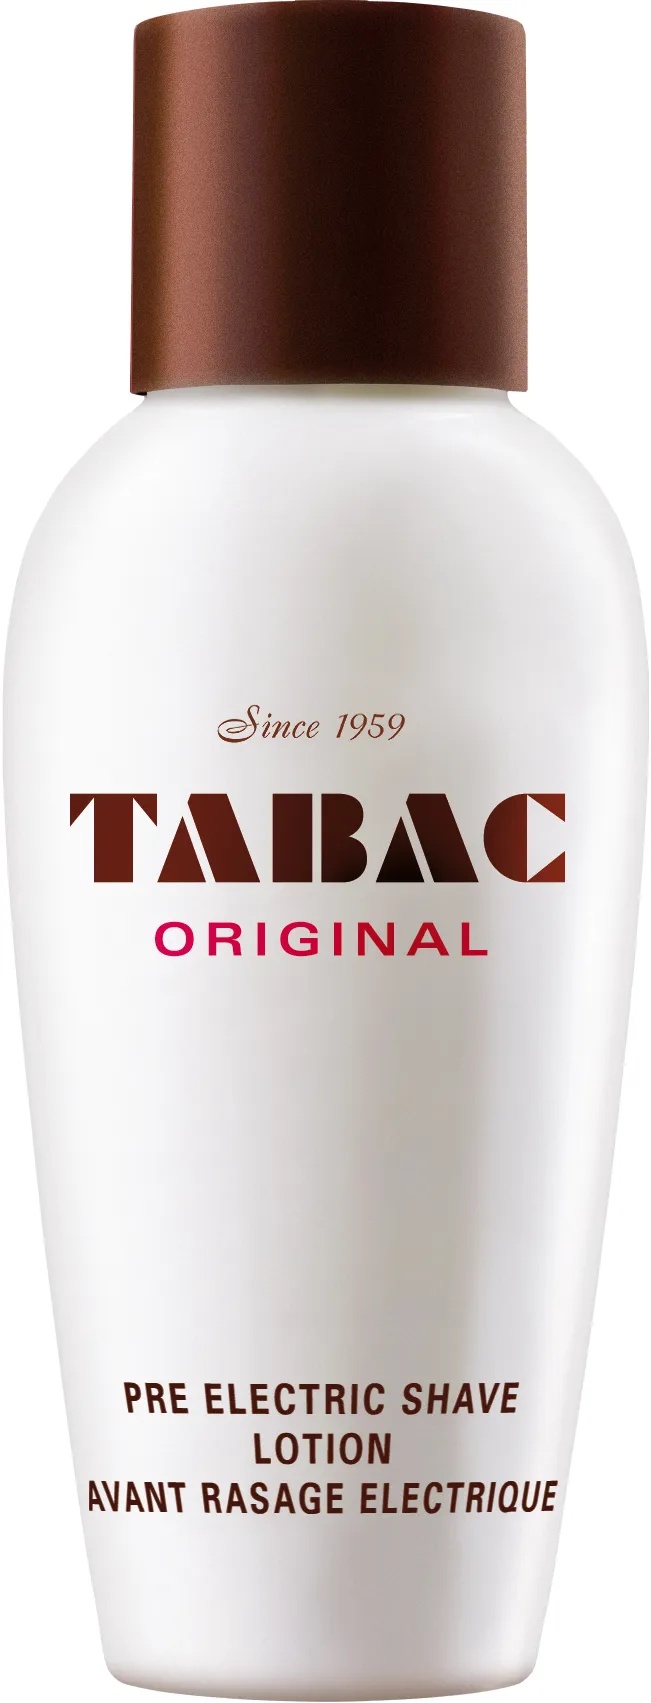 tabac pre shave